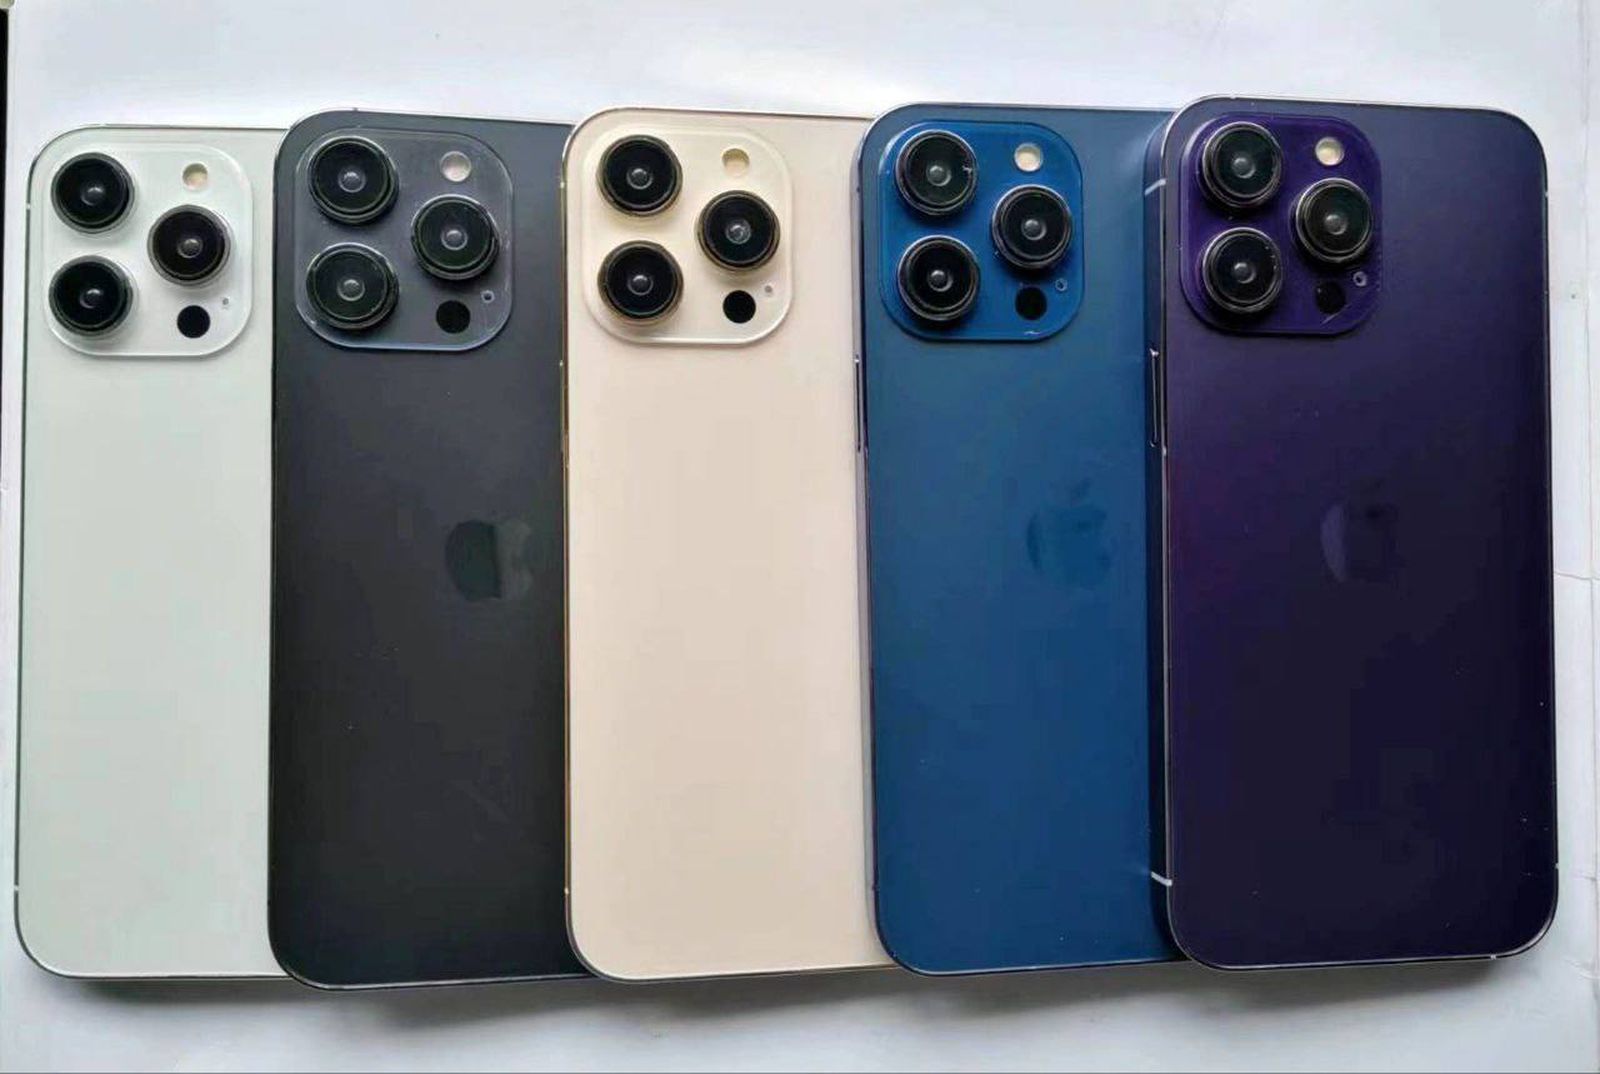 Apple iPhone 14 Pro color options leaked online ahead of launch next month  - Gizmochina